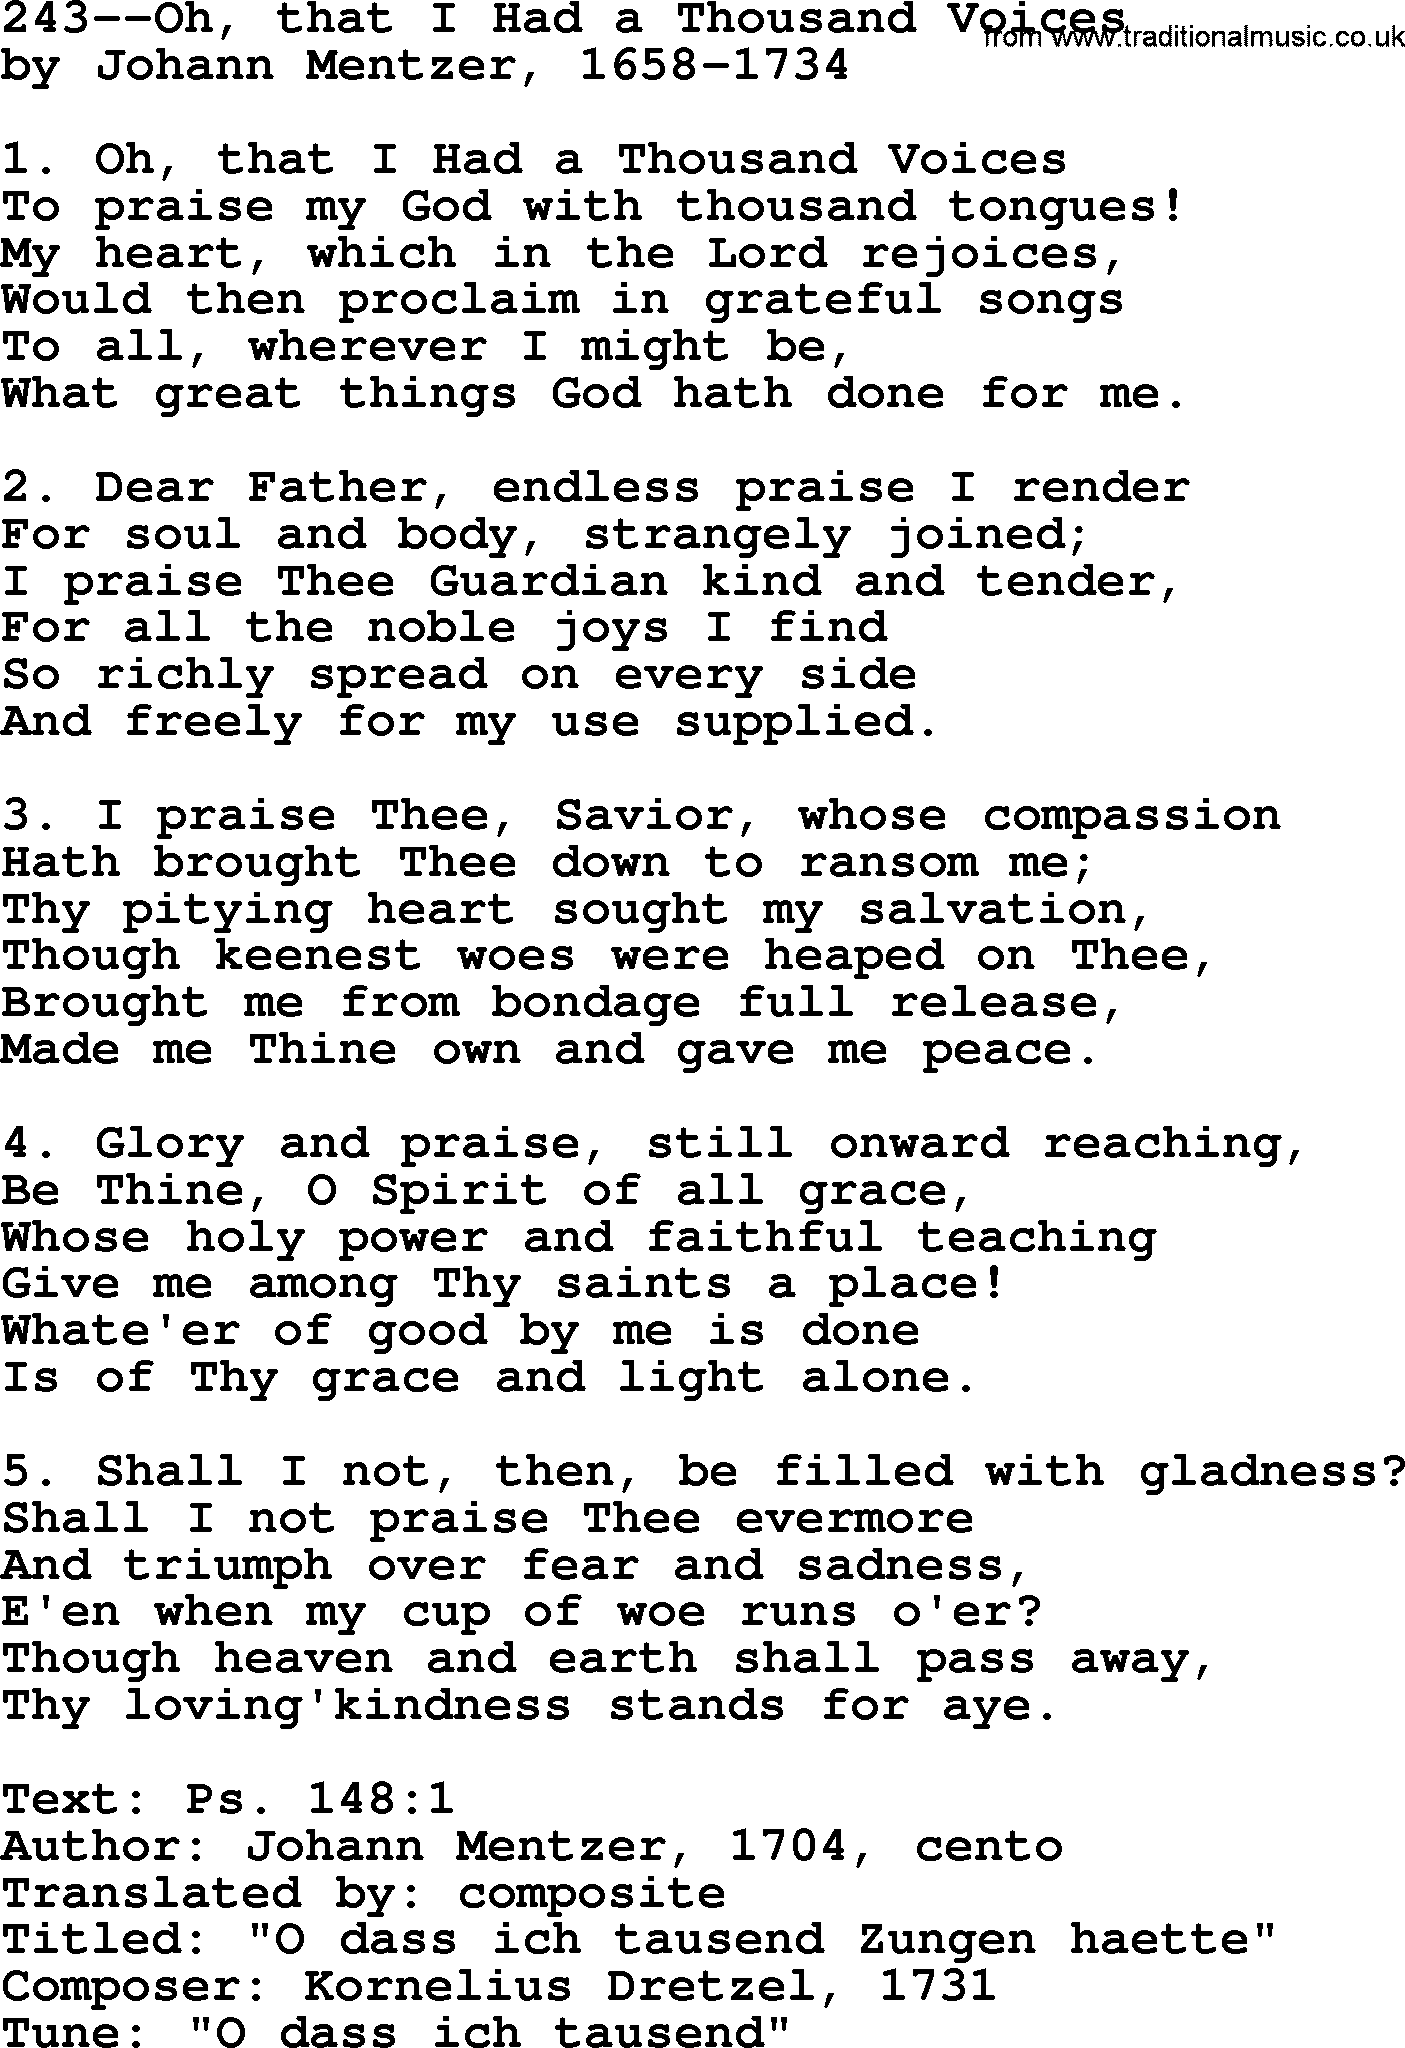 Lutheran Hymn: 243--Oh, that I Had a Thousand Voices.txt lyrics with PDF